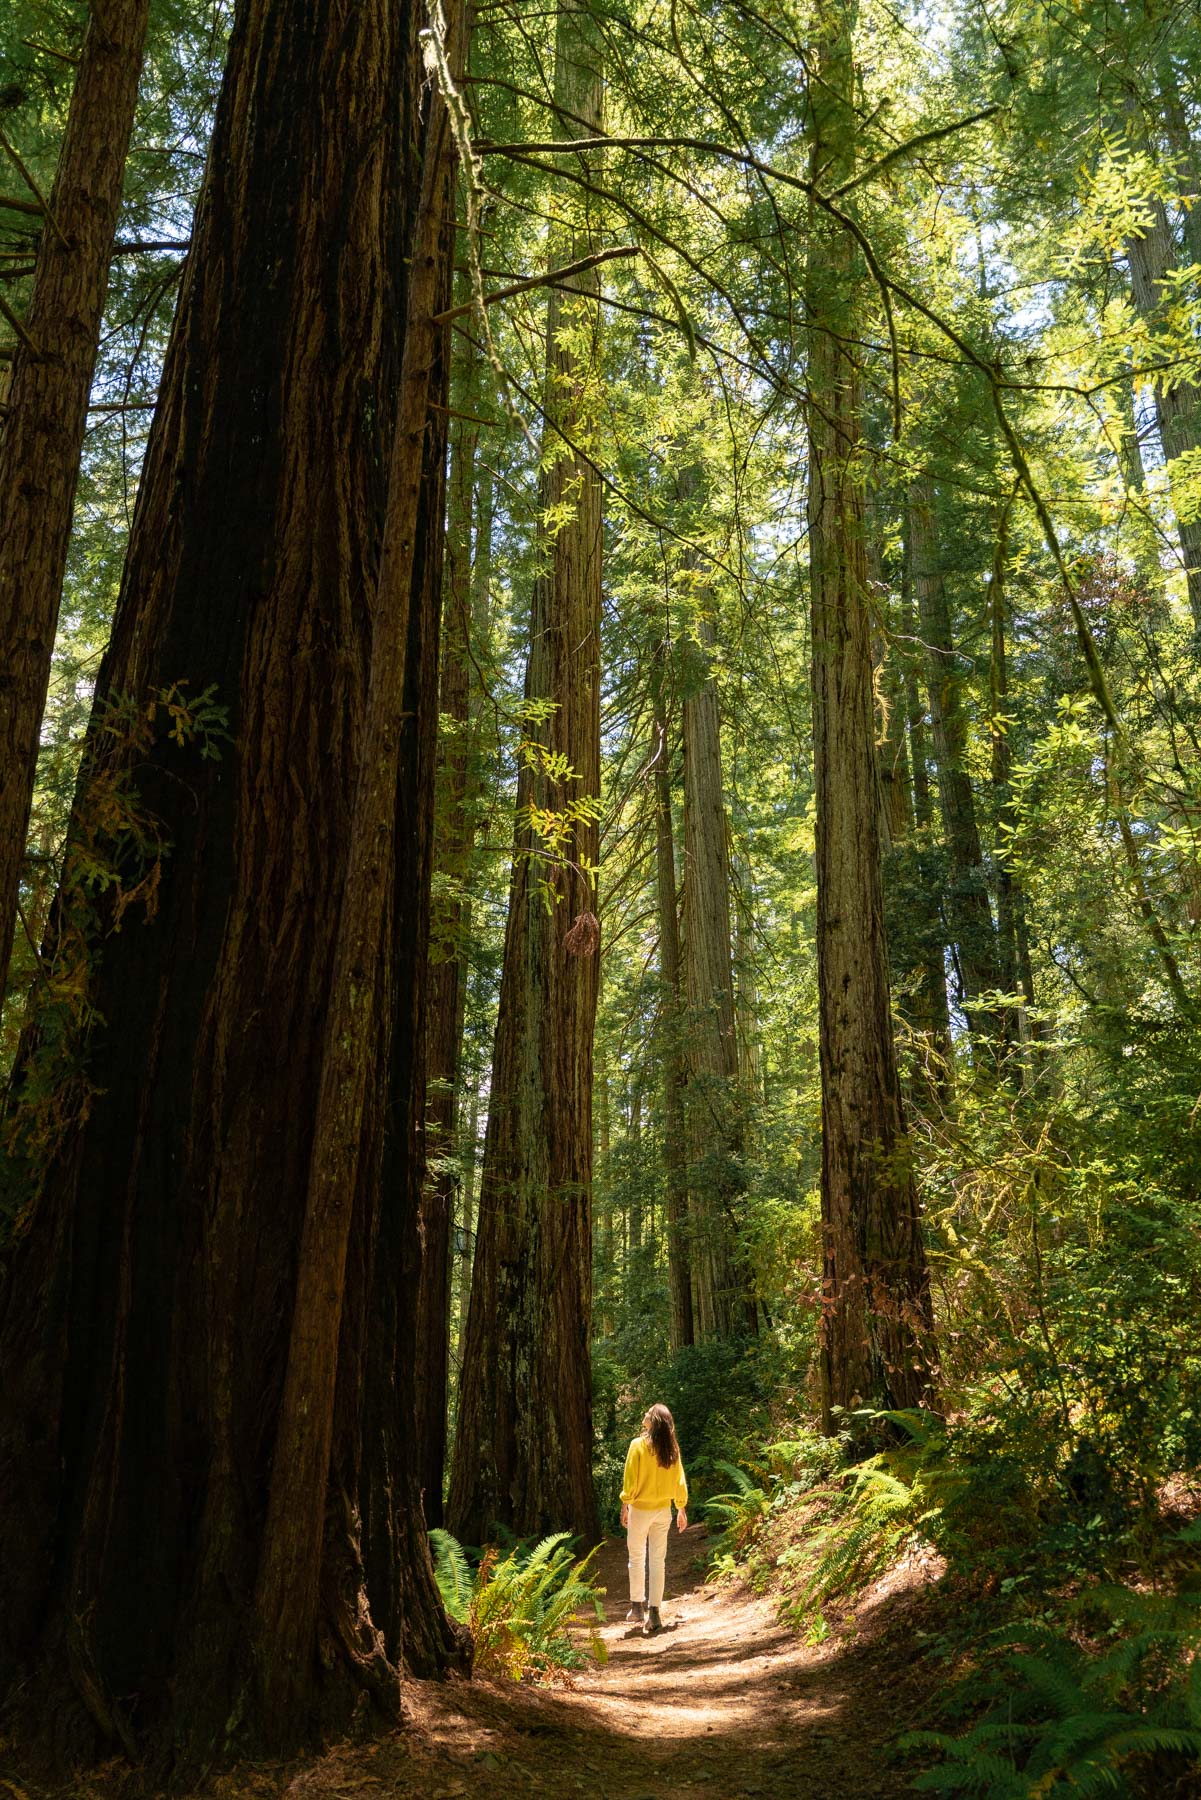 Where to find Redwoods in Oregon